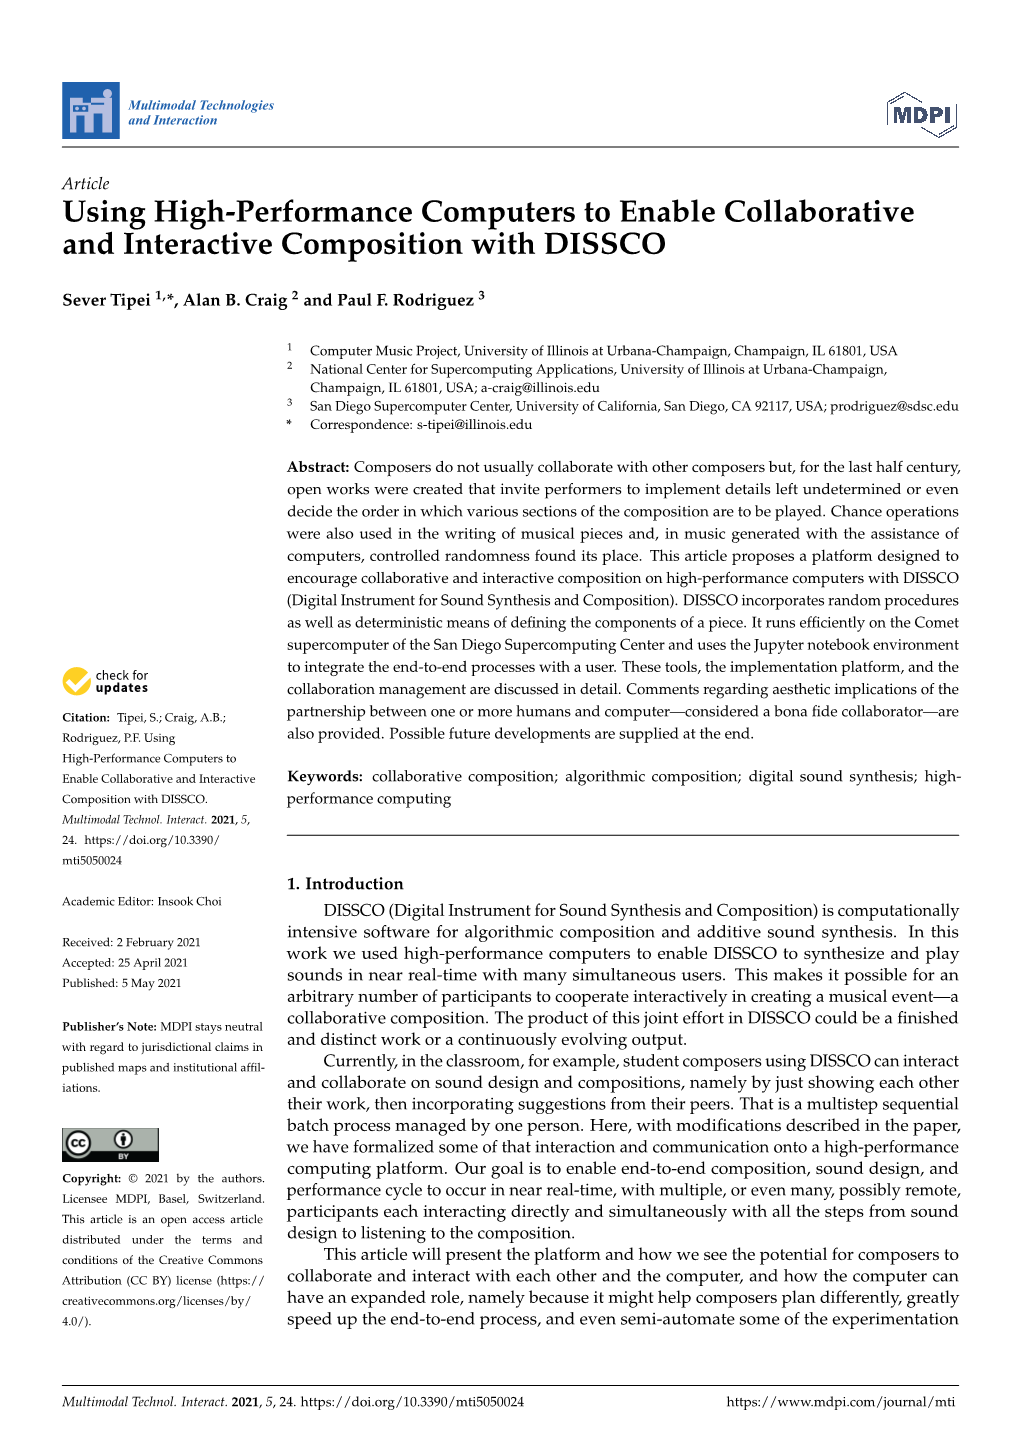 Using High-Performance Computers to Enable Collaborative and Interactive Composition with DISSCO